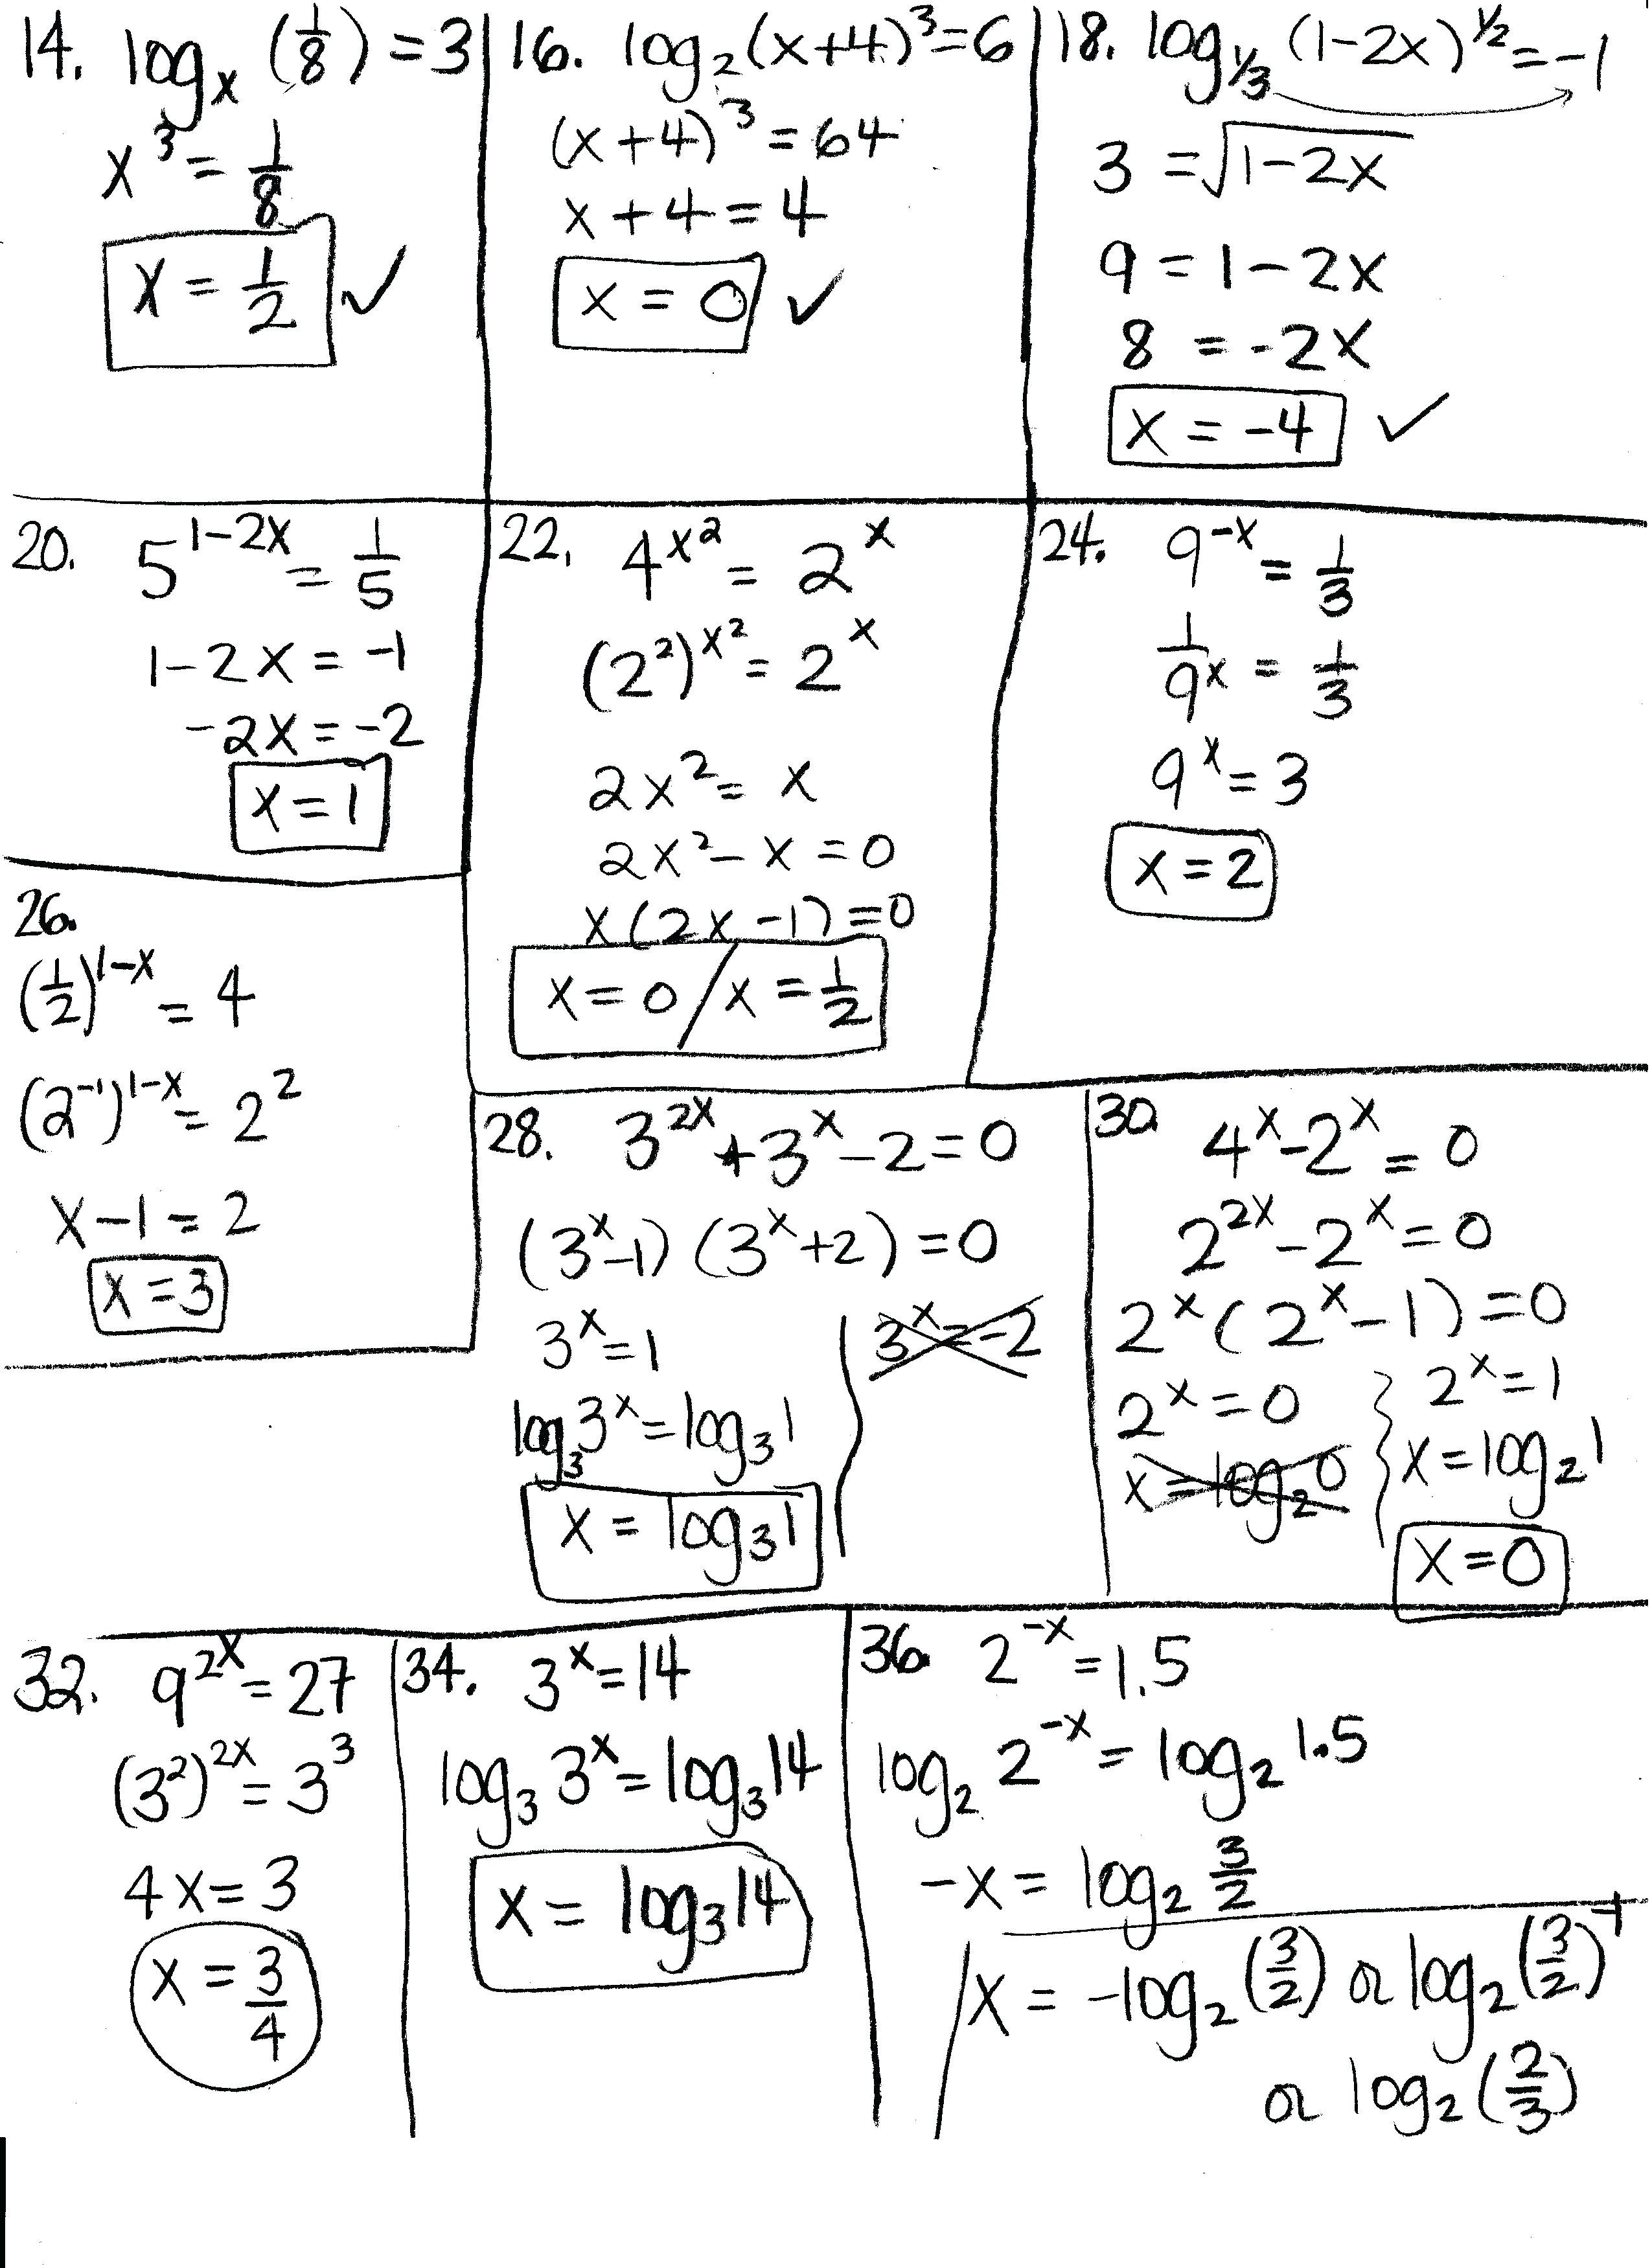 Algebra Log Math Algebra 2 Logarithm And Exponential Functions Test Regarding Exponential And Logarithmic Functions Worksheet With Answers